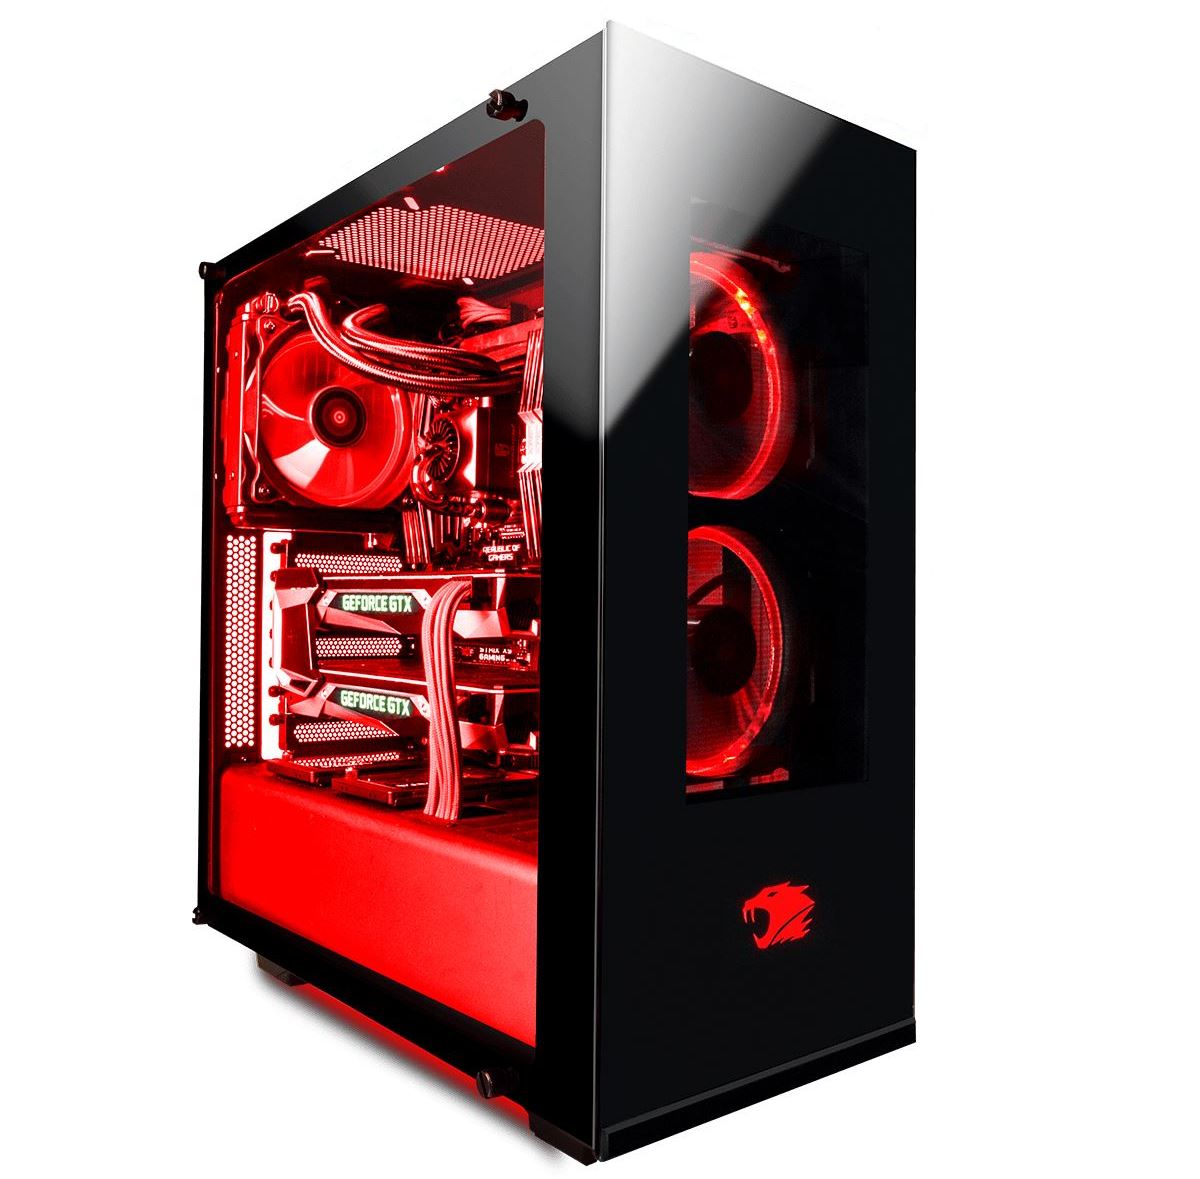 iBuyPower Element Gaming PC Review: i7-8086K and GTX 1080 Ti Inside